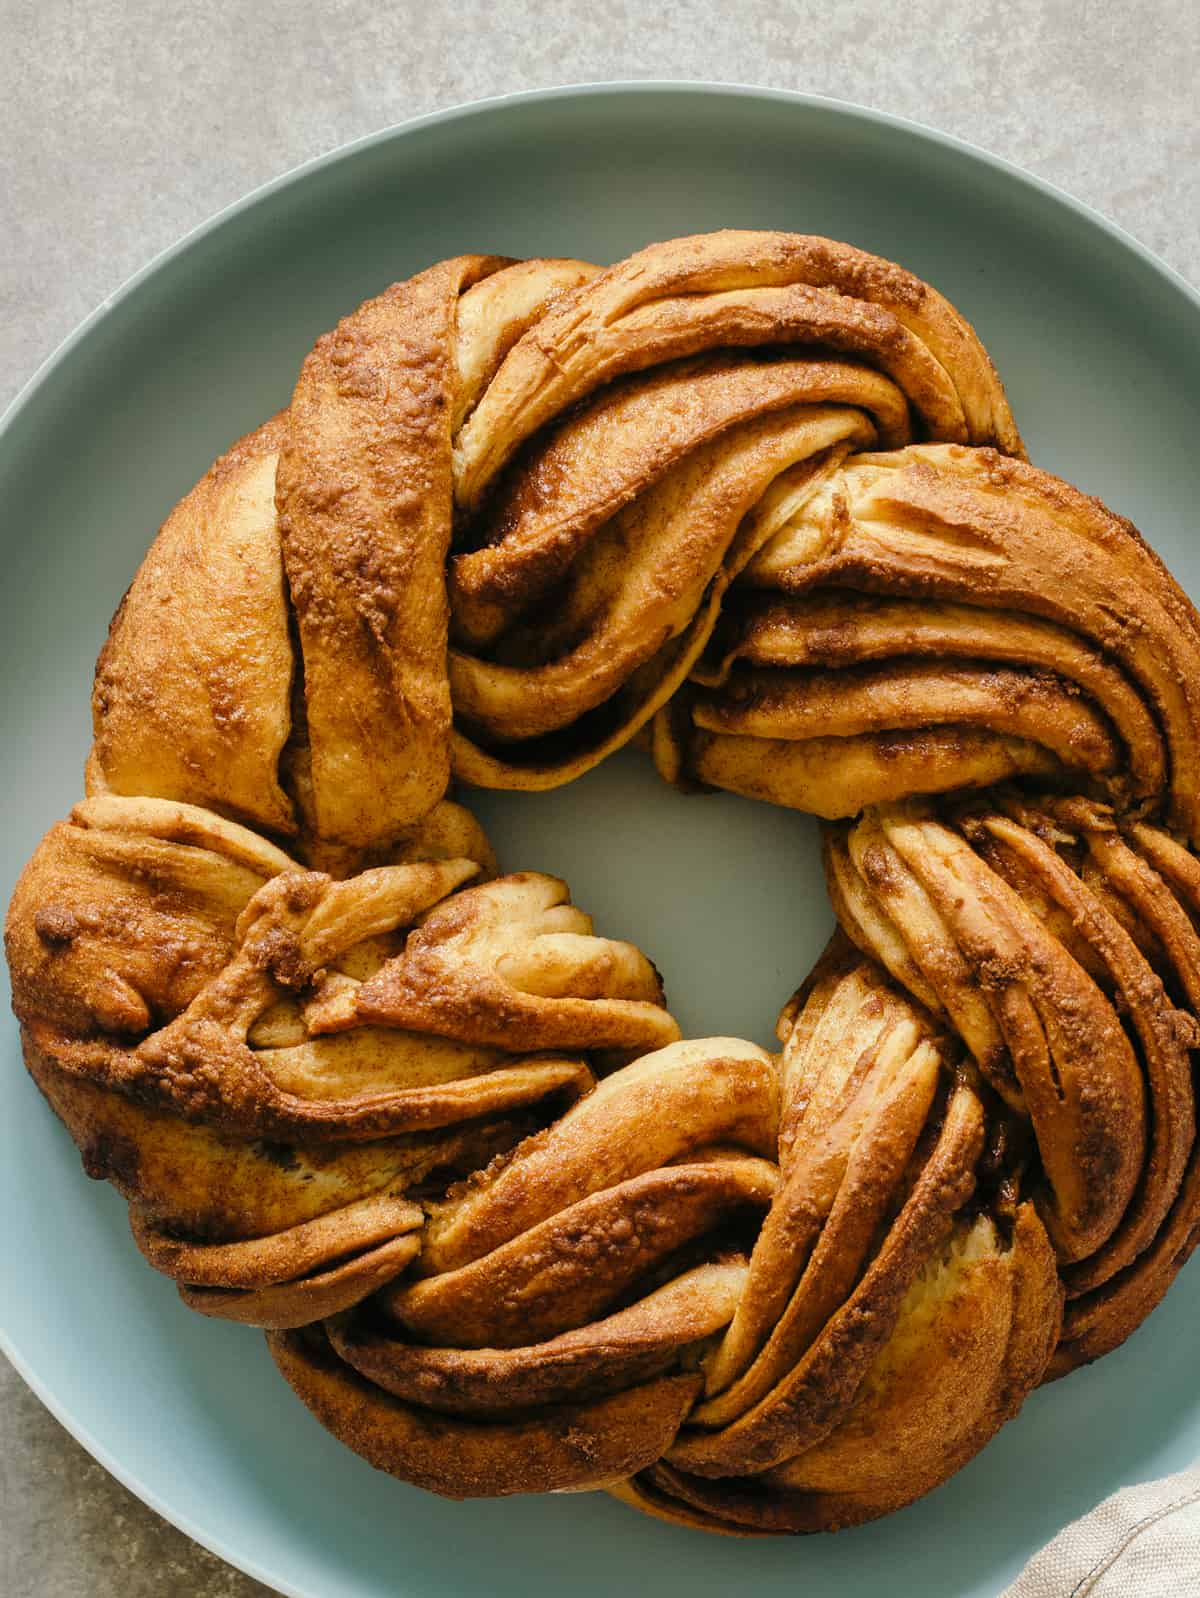 Naked brown butter braided cinnamon roll cake on a plate.